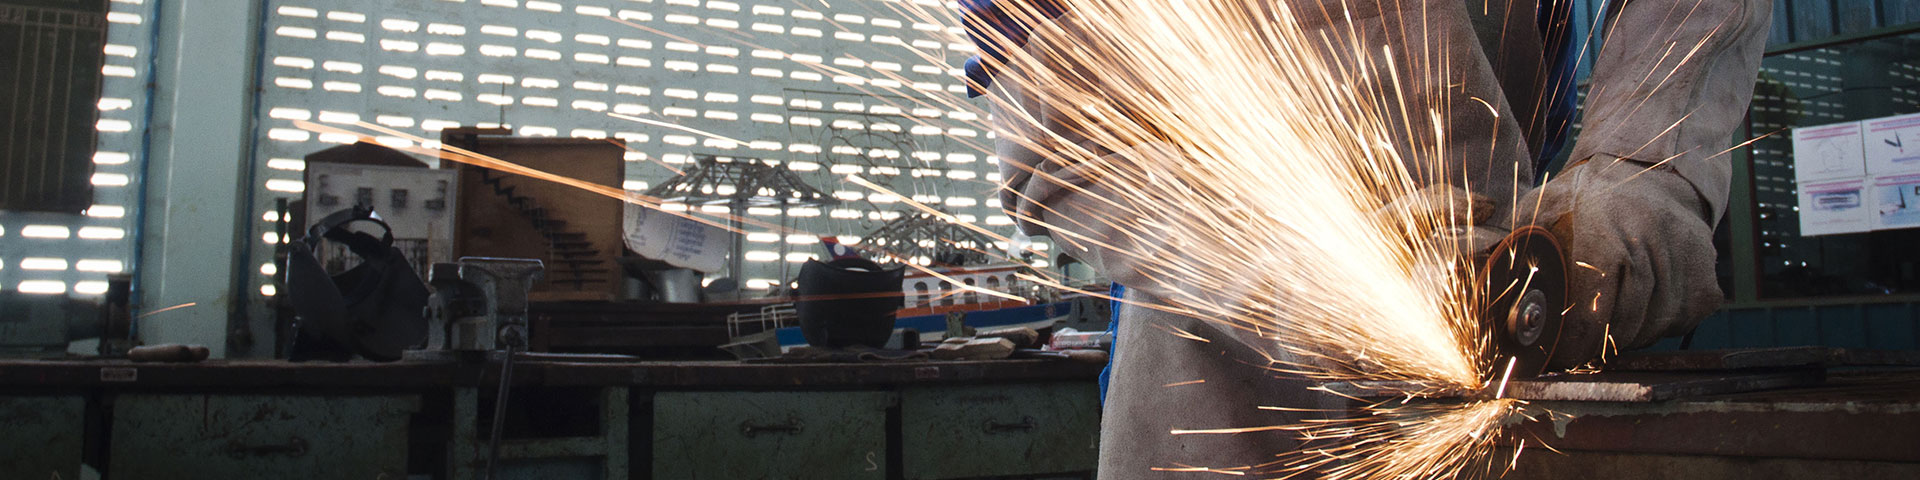 A person operates a grinder in a workshop; sparks fly from it. Copyright: GIZ